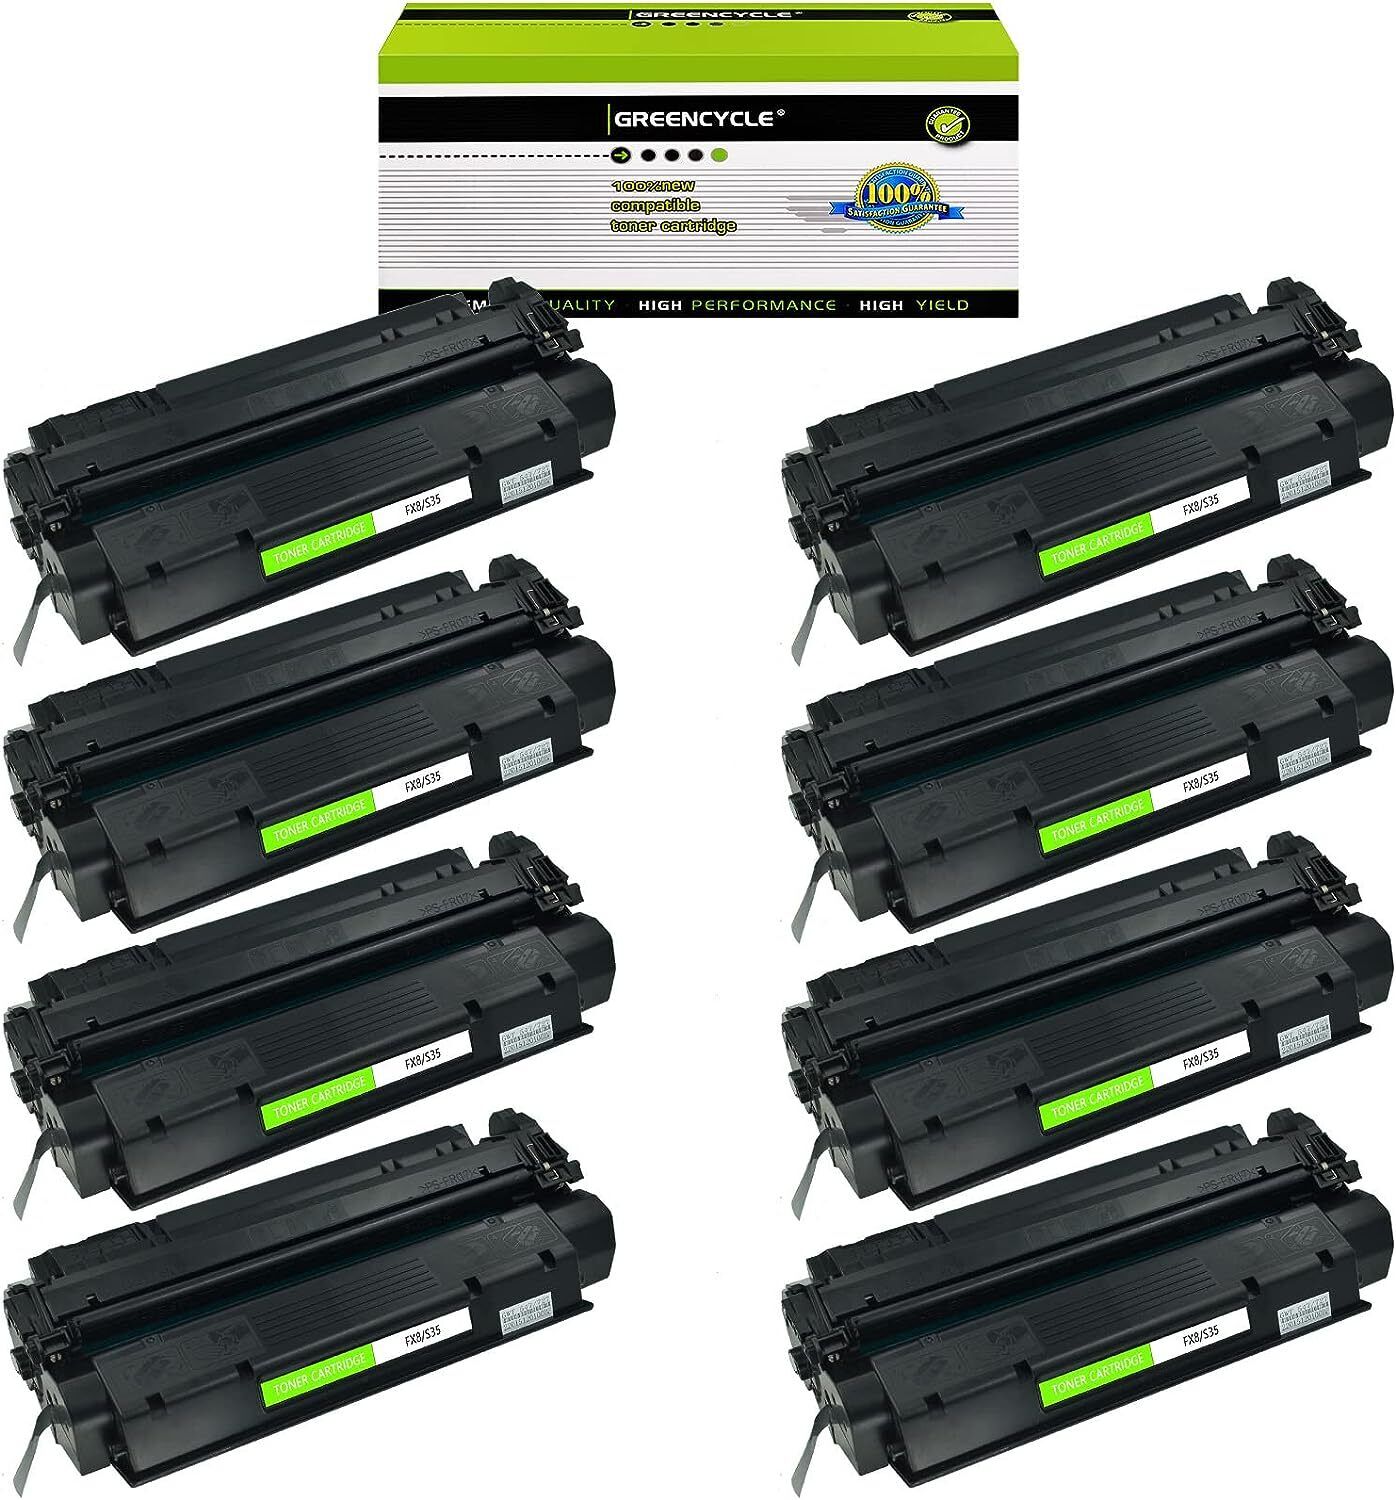 8PK greencycle Compatible for Canon FX8 S35 LaserClass 310 510 PC-D320 PC-D340